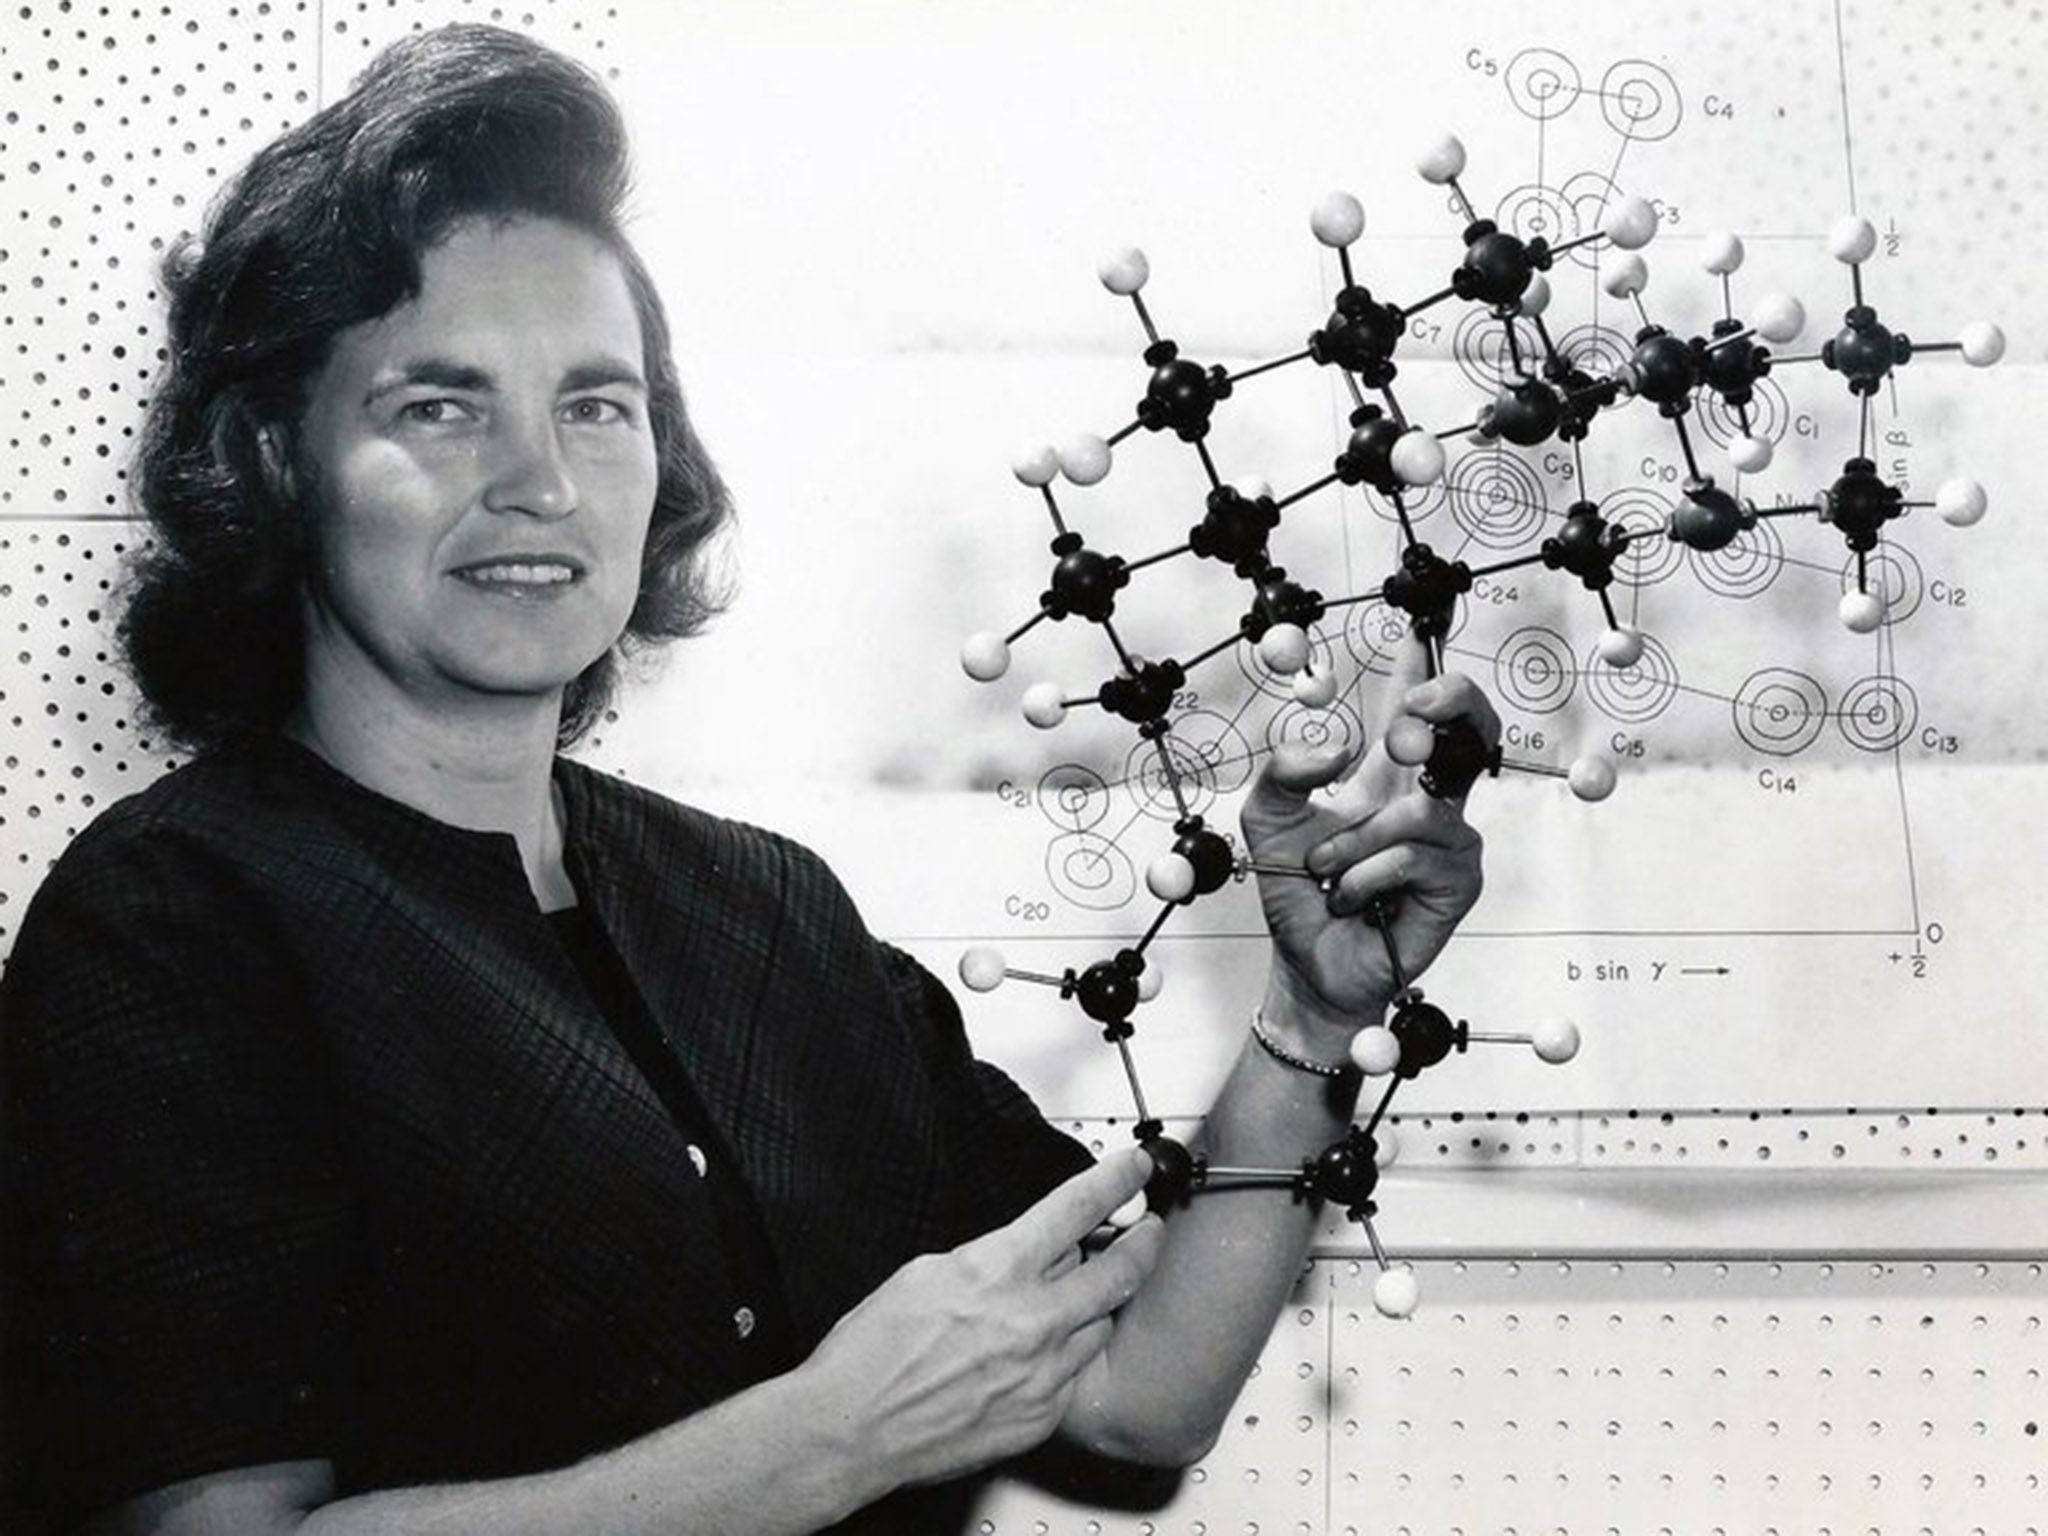 Karle worked on everything from anticarcinogens to explosives, and received the National Medal of Science from Bill Clinton